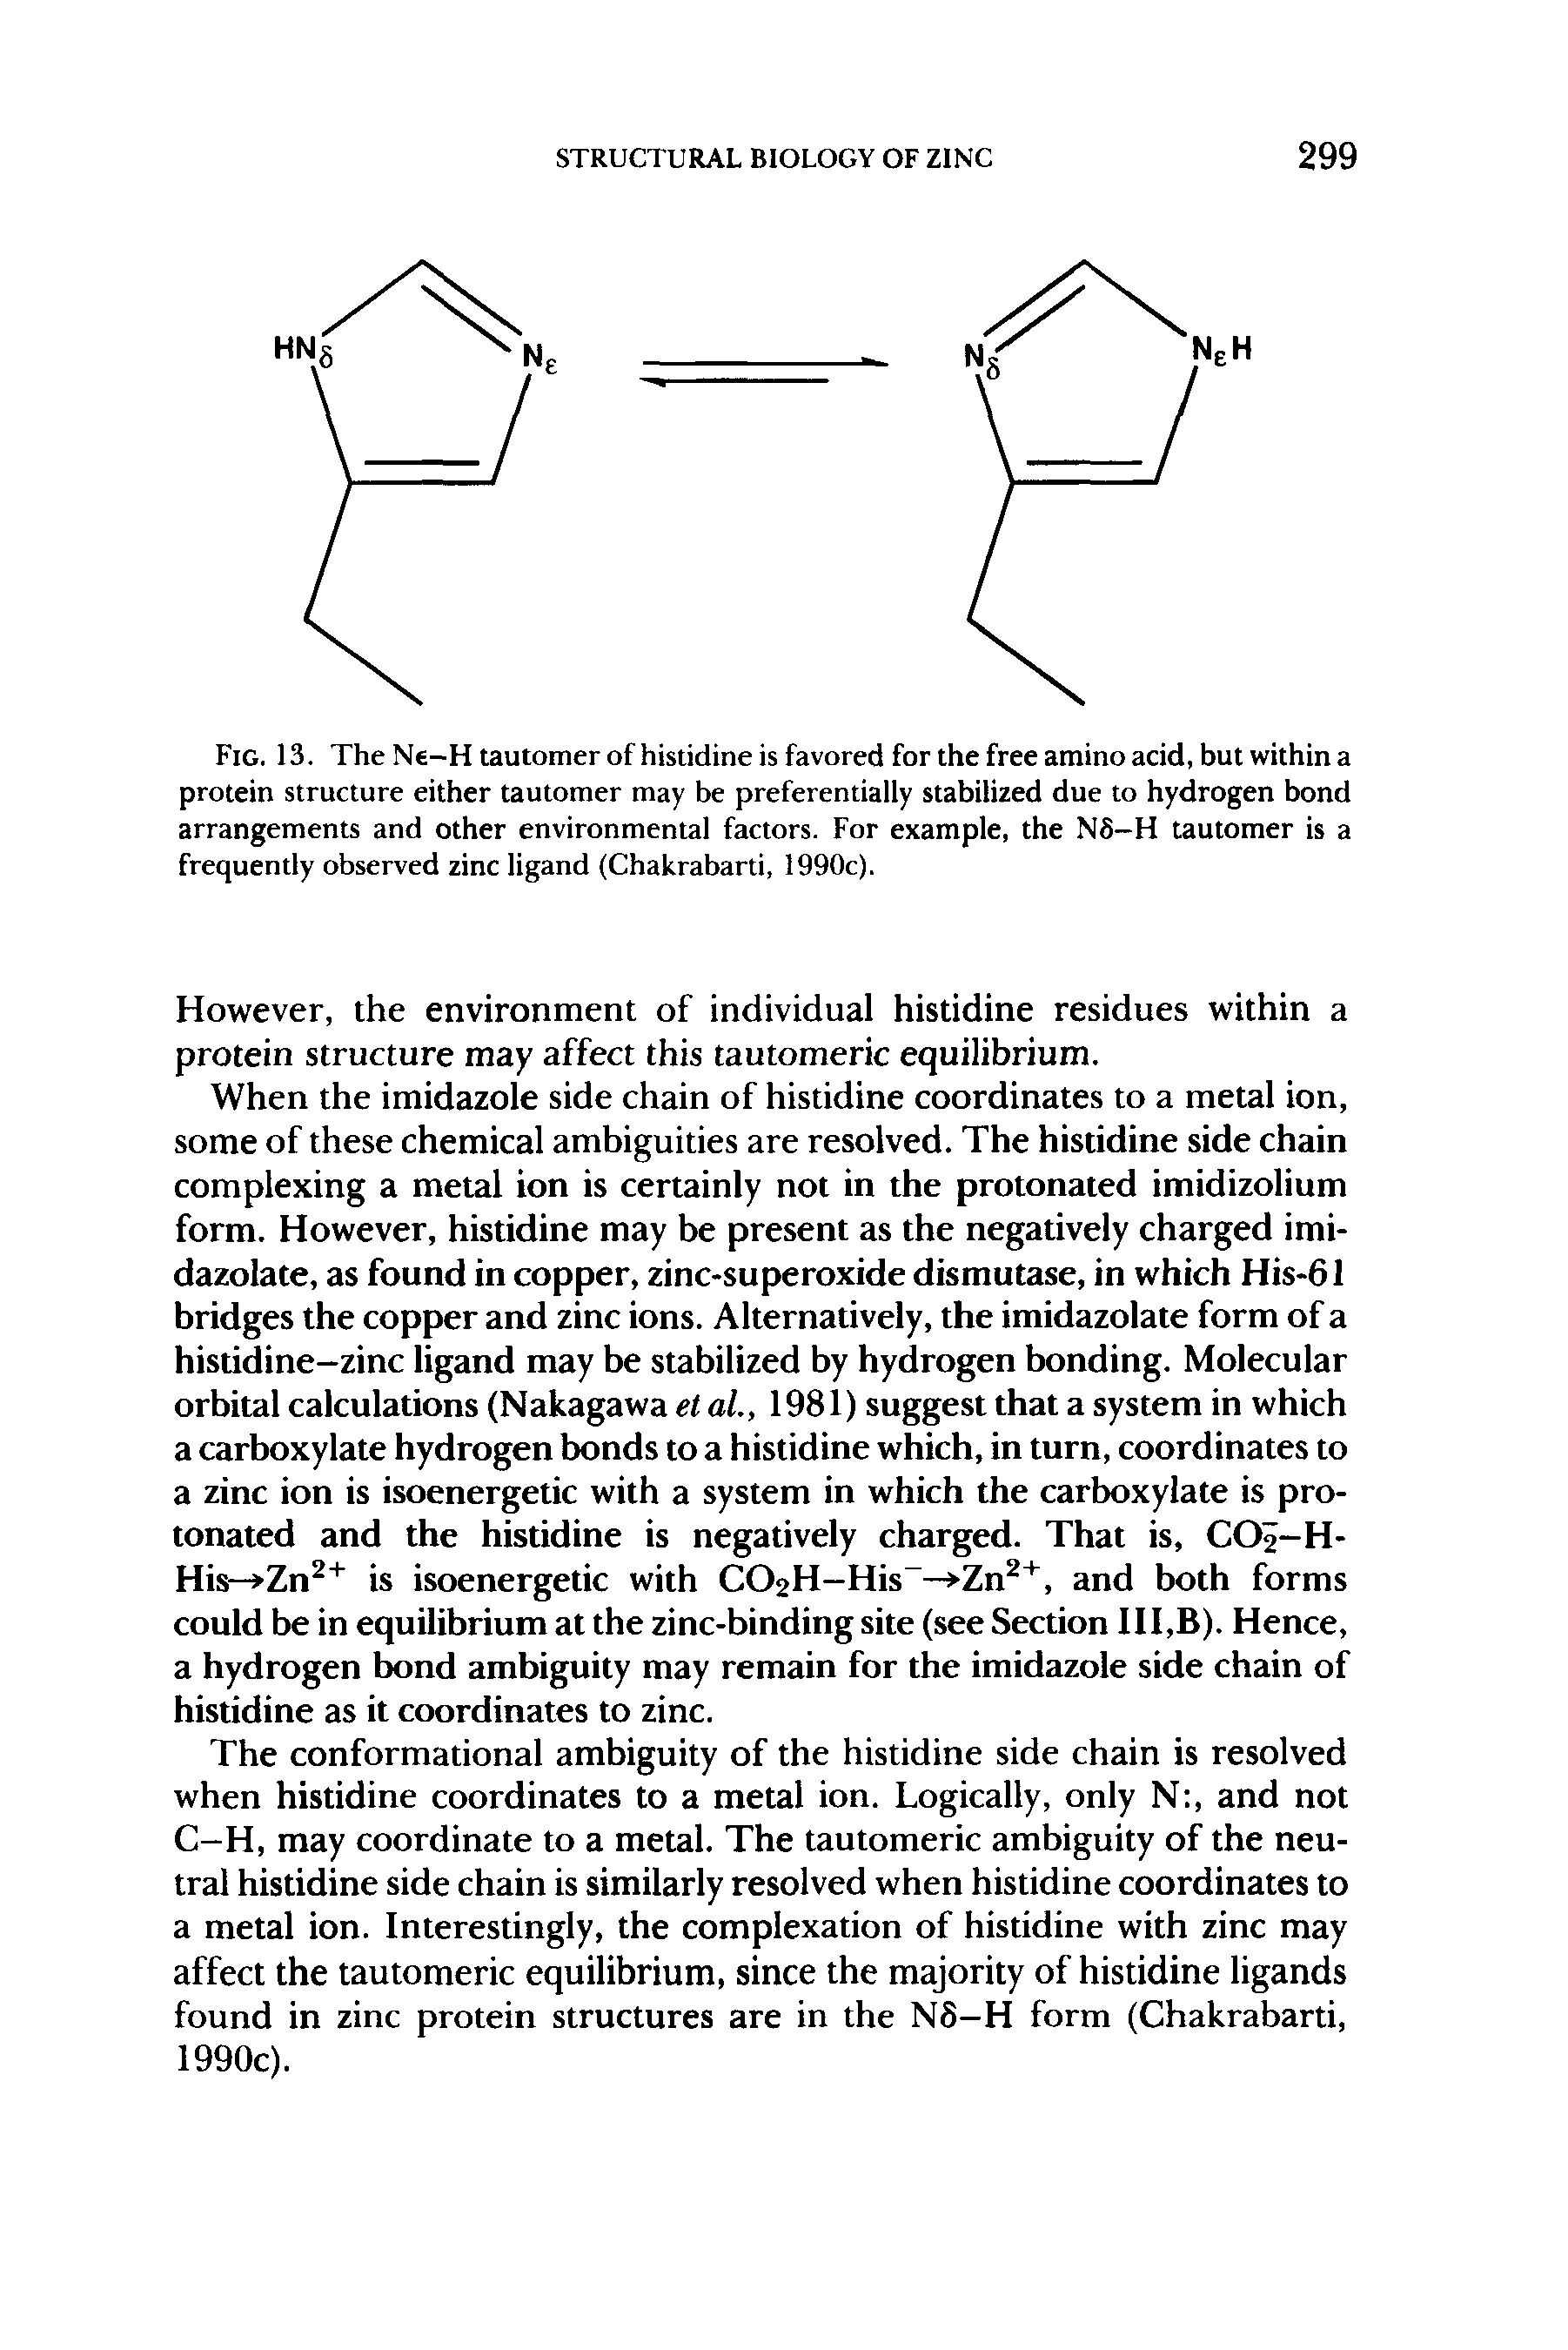 Fig. 13. The Ne-H tautomer of histidine is favored for the free amino acid, but within a protein structure either tautomer may be preferentially stabilized due to hydrogen bond arrangements and other environmental factors. For example, the NS-H tautomer is a frequently observed zinc ligand (Chakrabarti, 1990c).